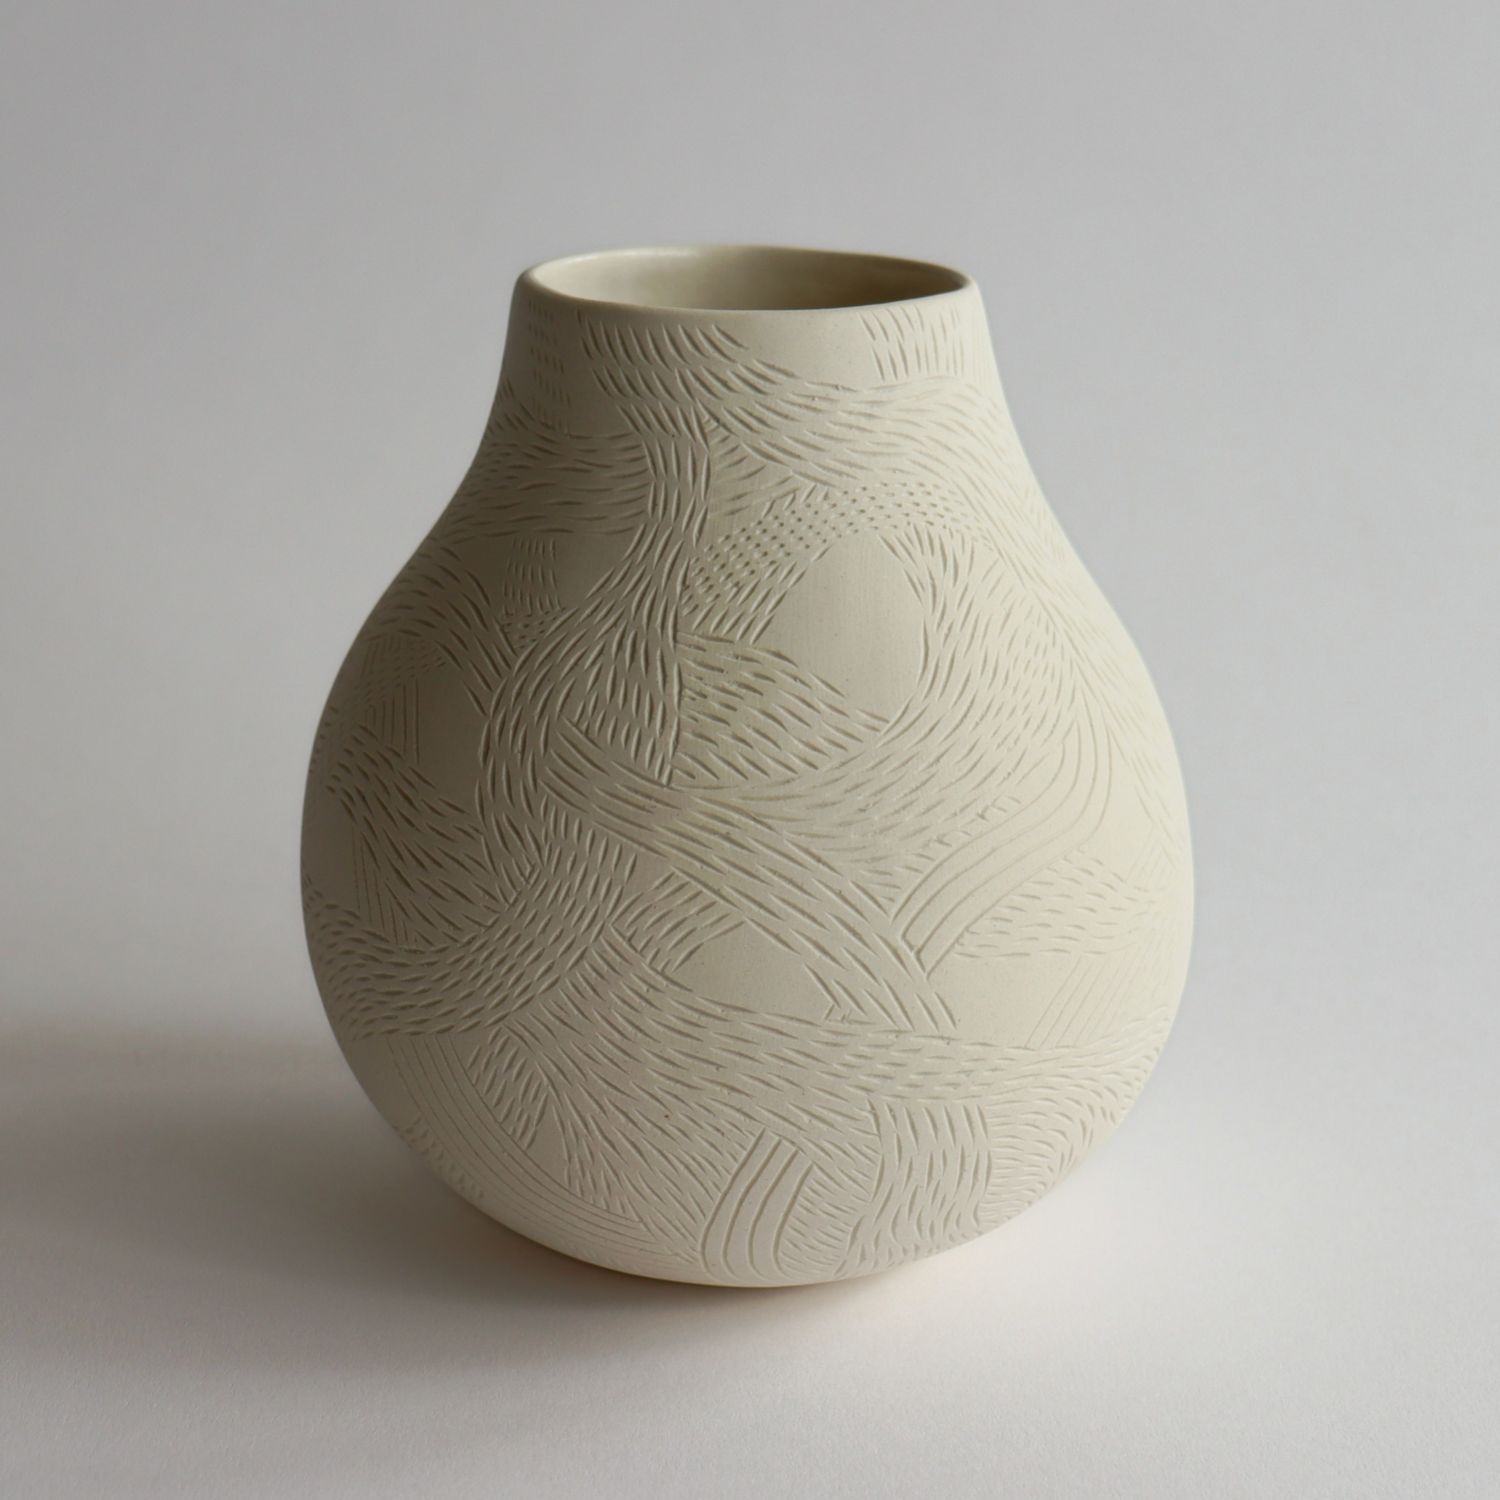 Talia Silva: Subtle Echoes – Orb Vessel Fully Carved Product Image 1 of 1